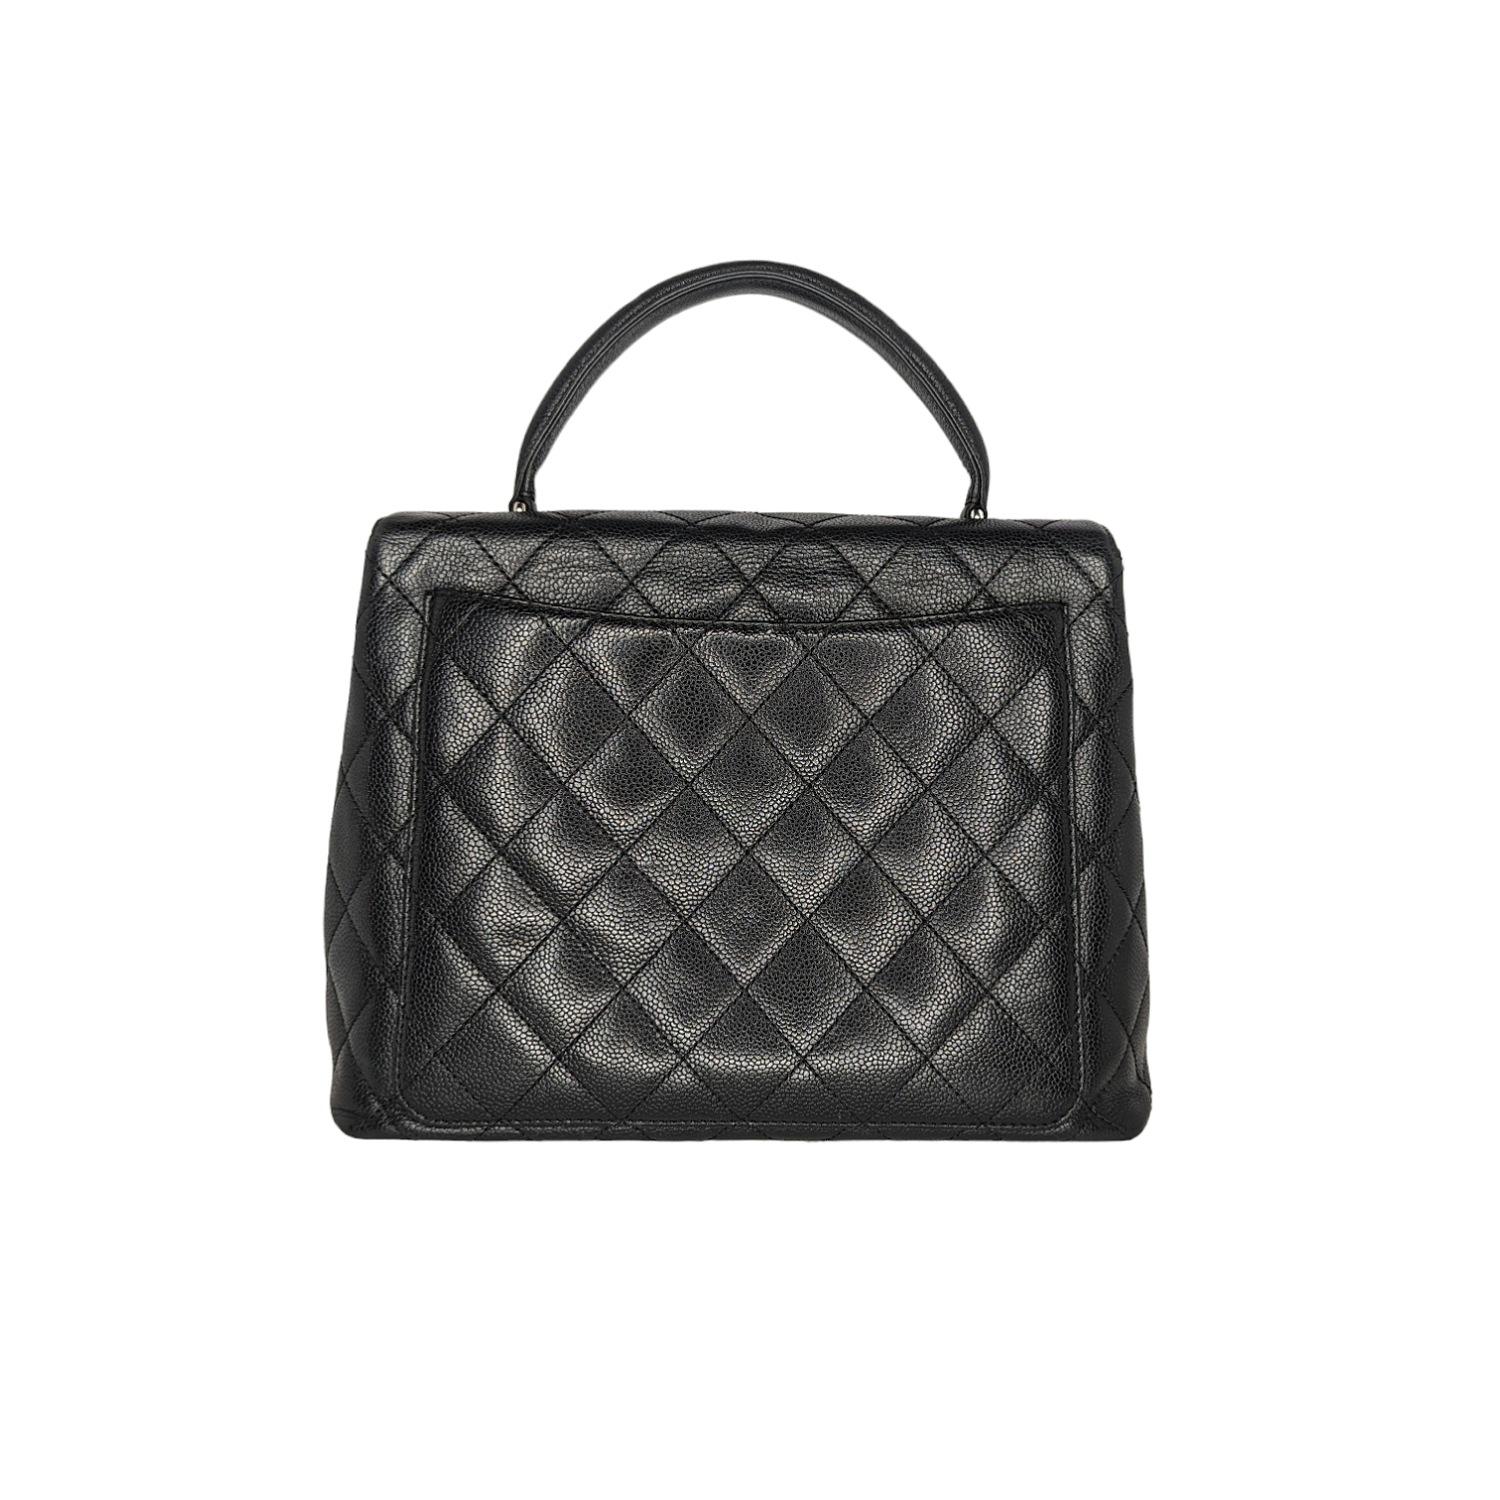 Chanel Vintage Caviar Quilted Kelly Top Handle Bag In Good Condition For Sale In Scottsdale, AZ